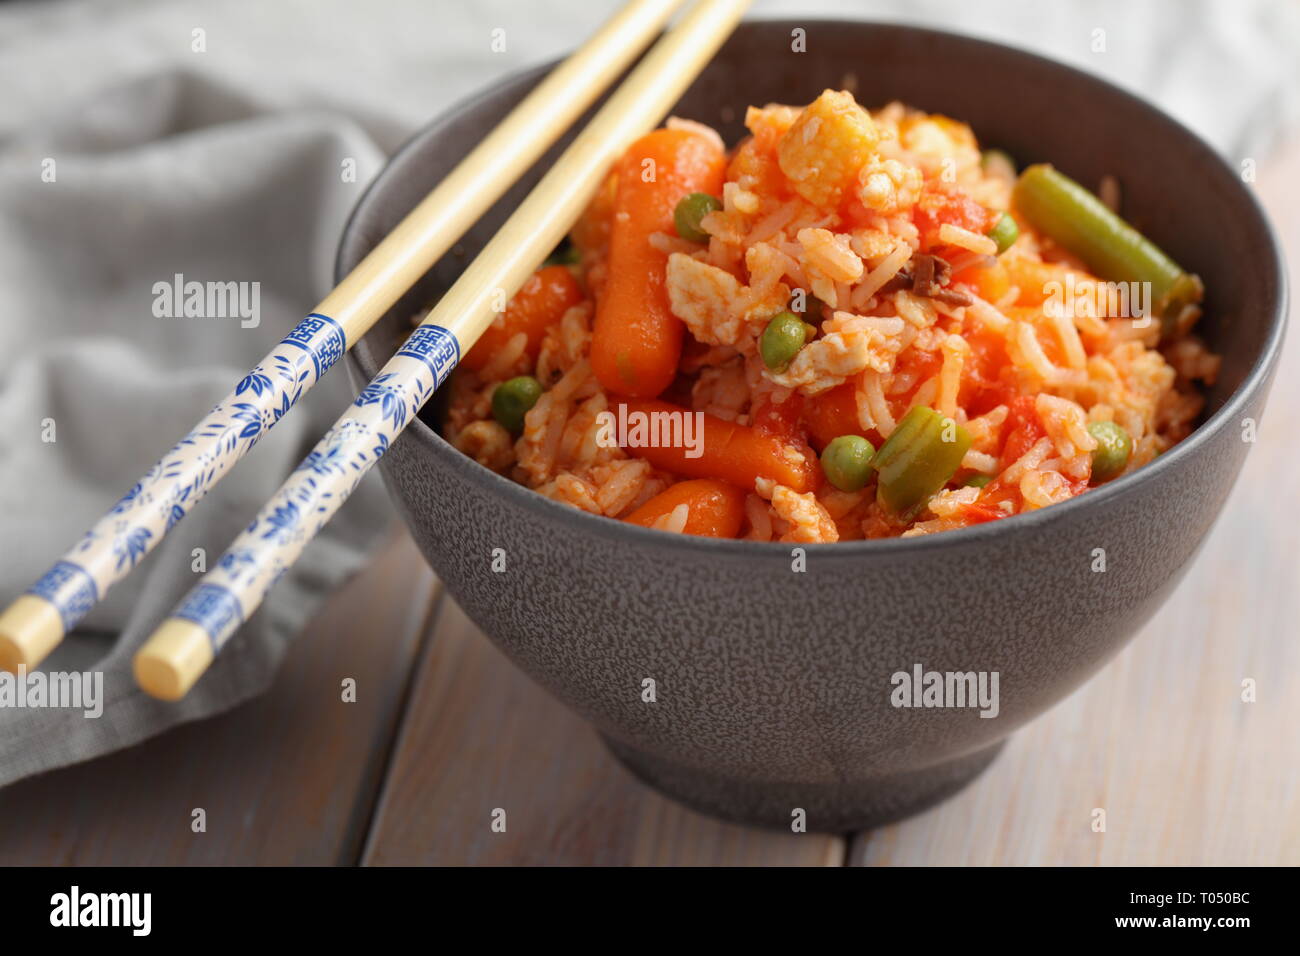 Vegan Fried Rice with vegetables. Chinese cuisine Stock Photo